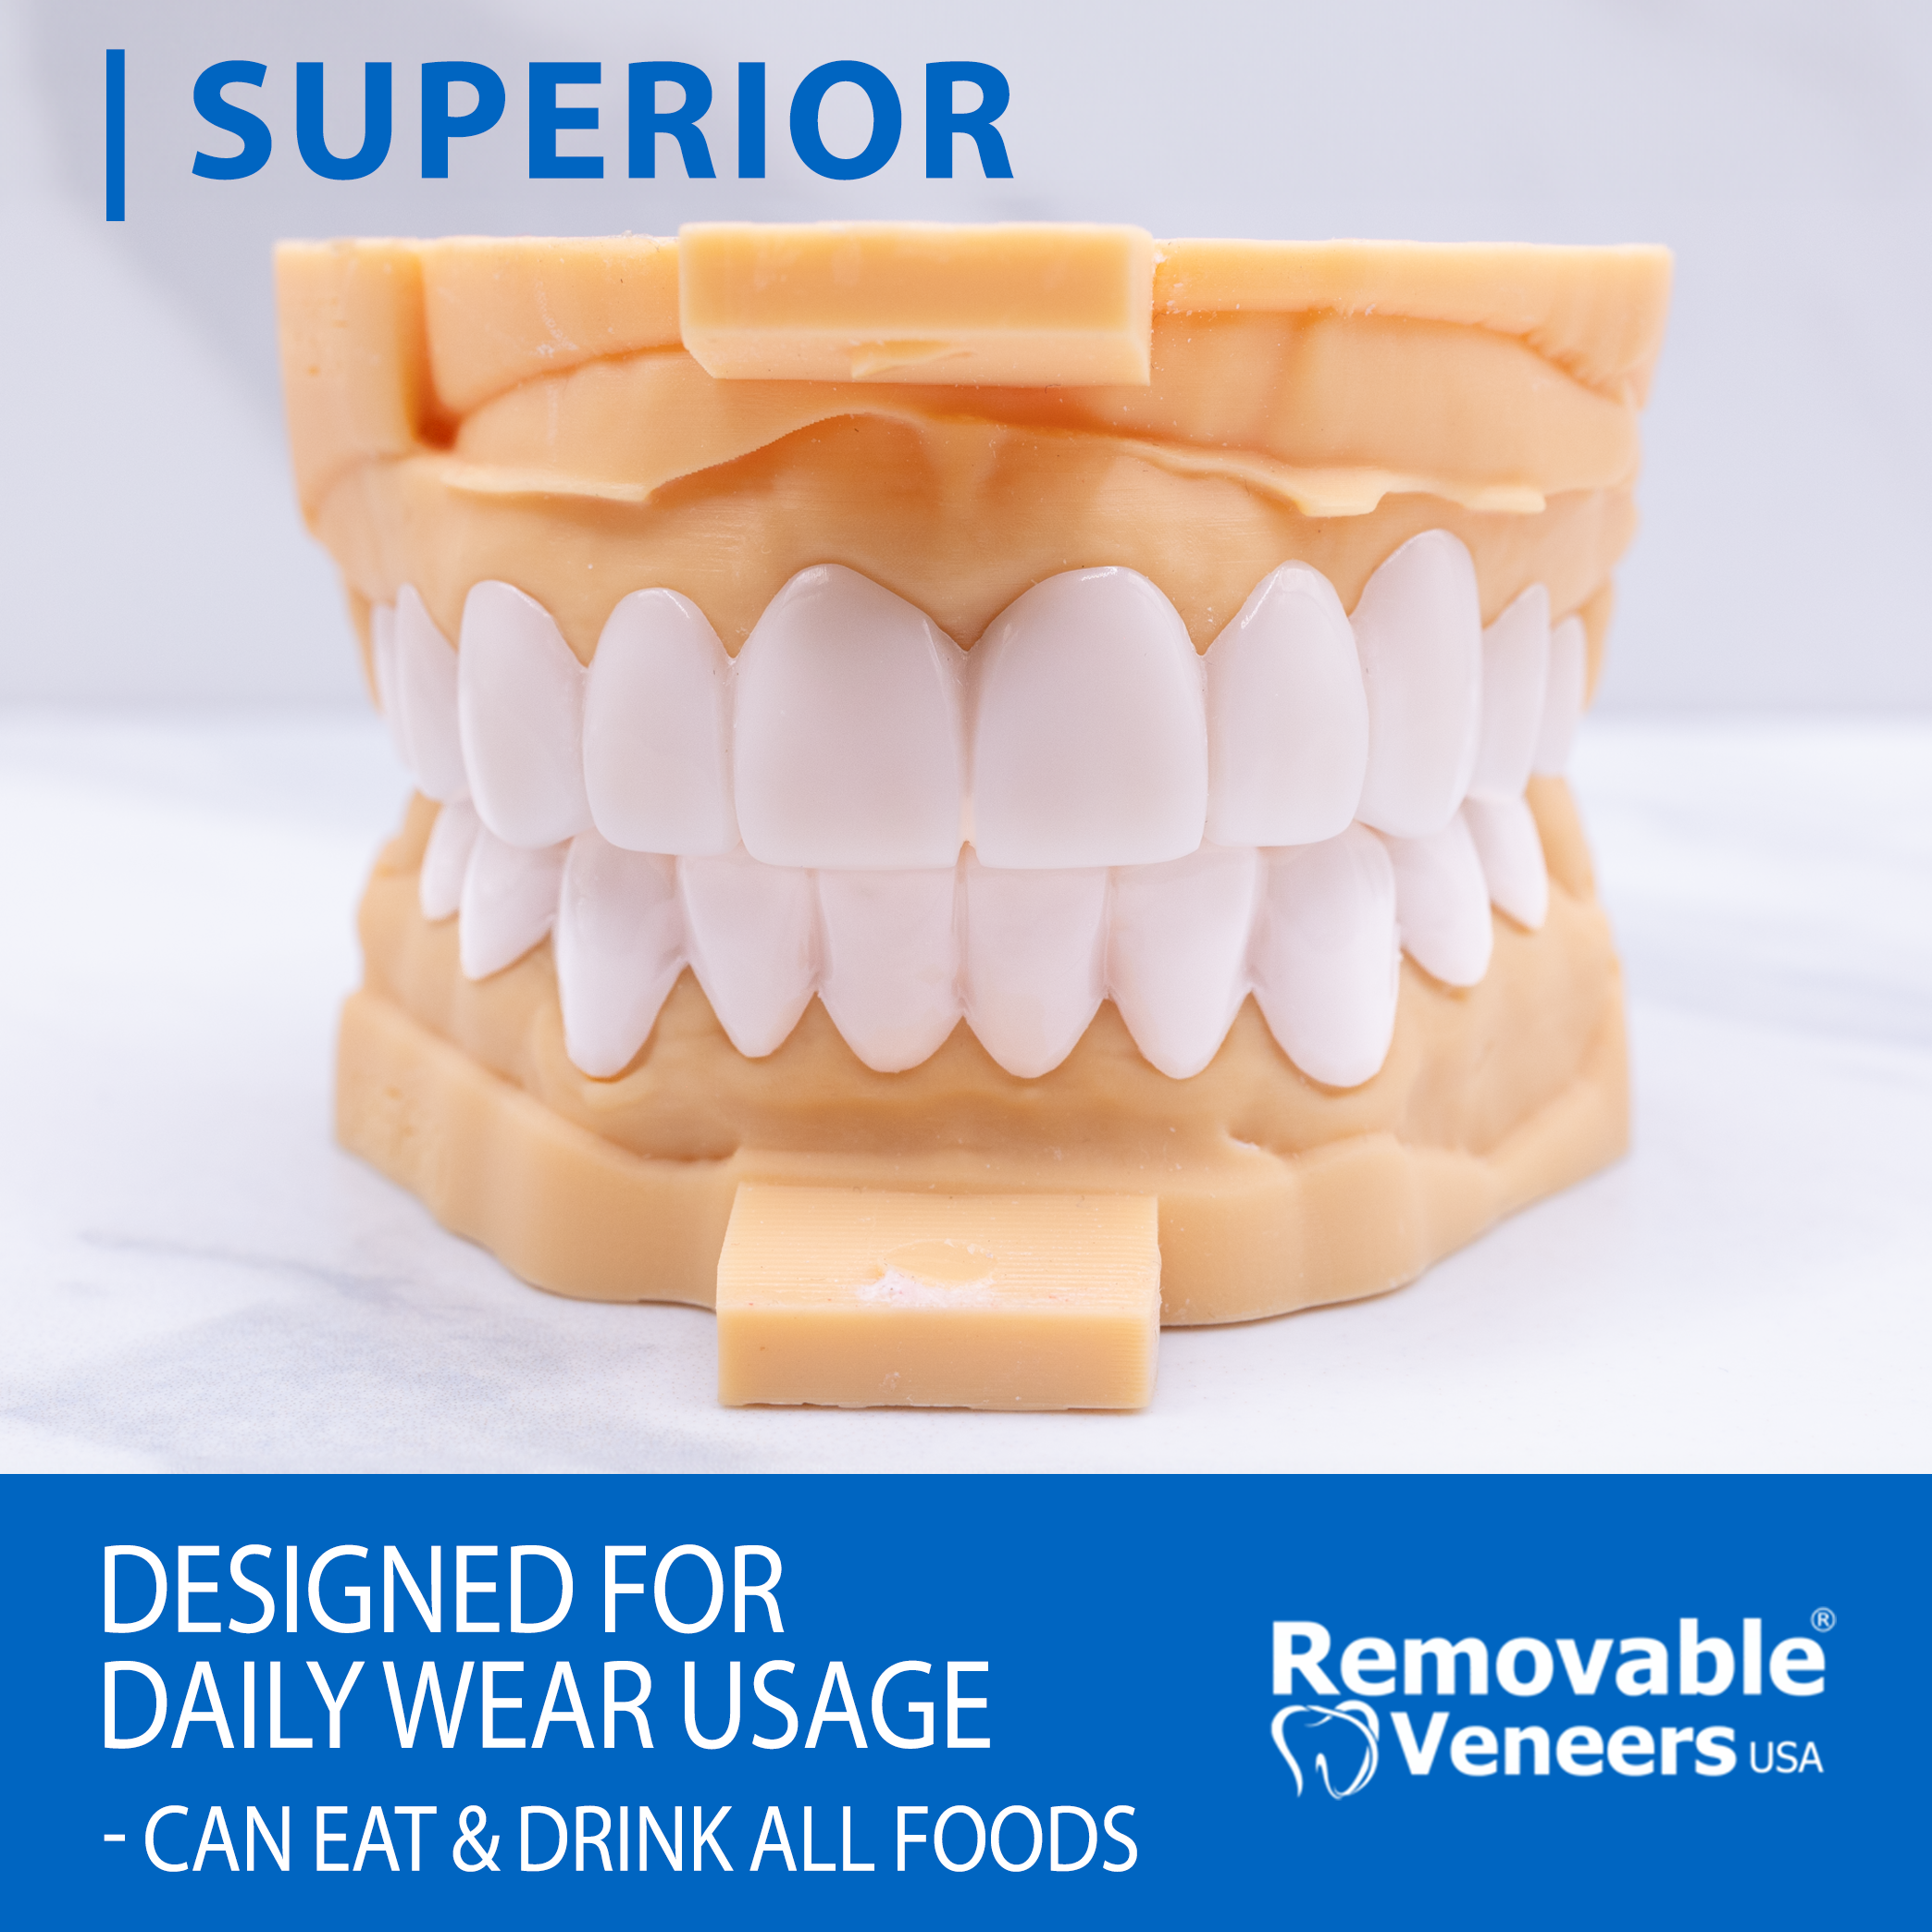 Superior Model Veneers - Designed for Daily Wear Usage - Can Eat & Drink All Foods